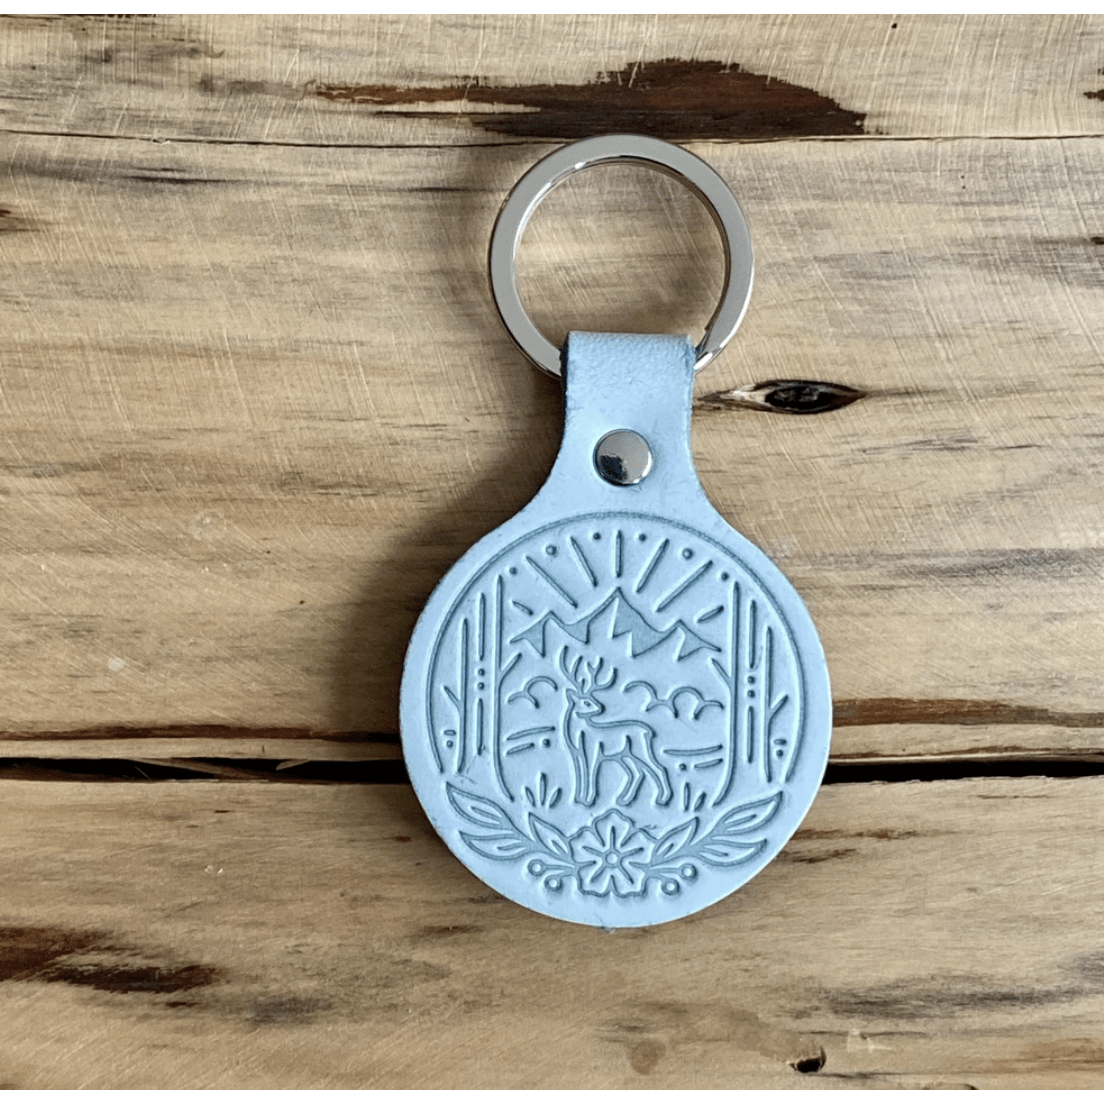 Godd & Well Supply Co. | Pinewood Green Leather Keychain, Keychains, Good & Well Supply Co., Defiance Outdoor Gear Co.